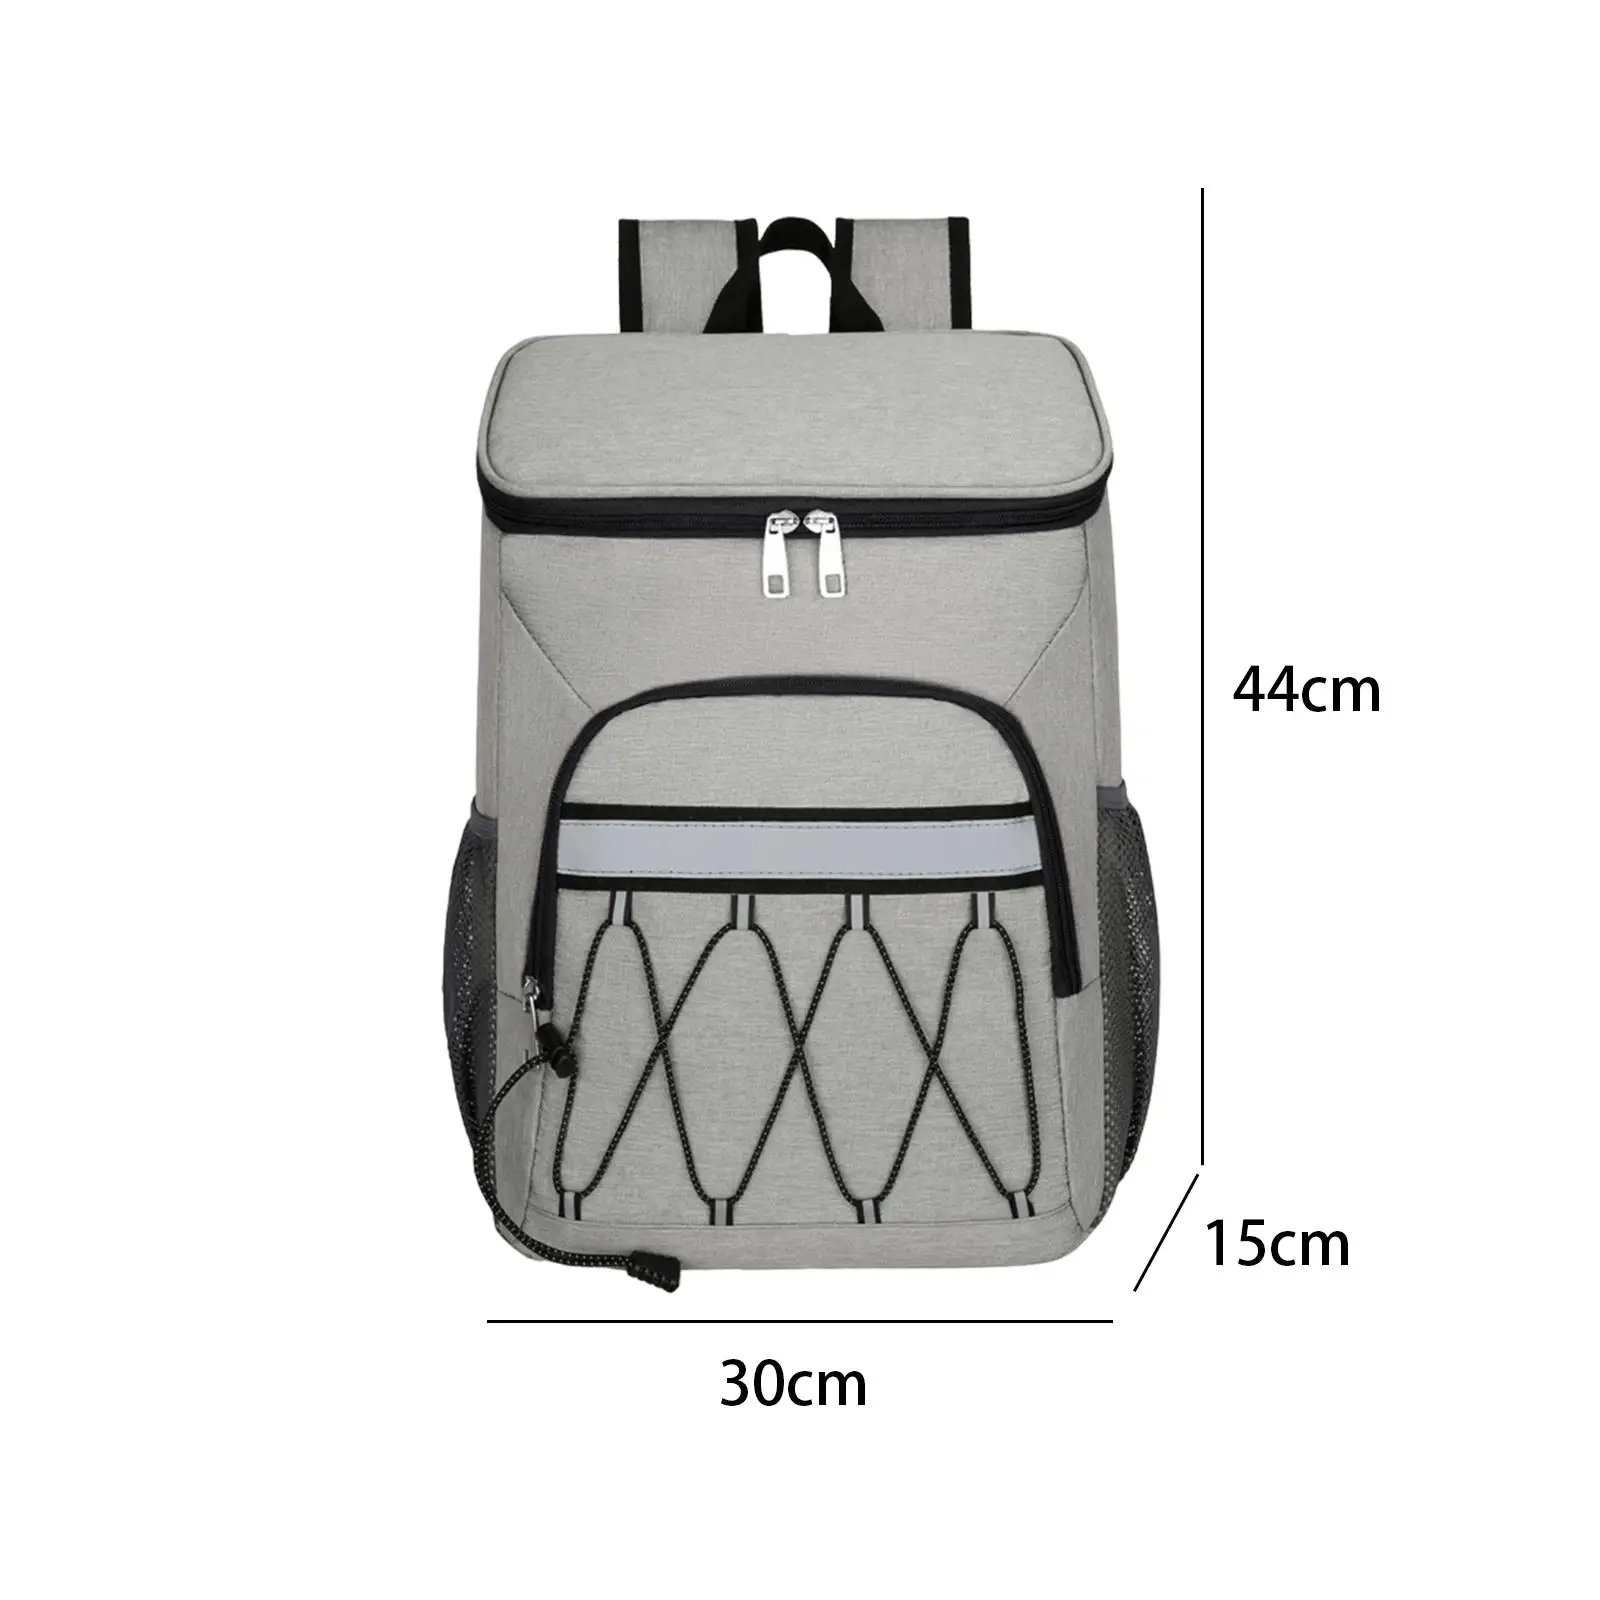 Insulated Cooler Backpack Beach Cooler Portable Zipper Adult Daypack Cooler Lunch Backpack Picnic Bag for Park Day Trips Hiking